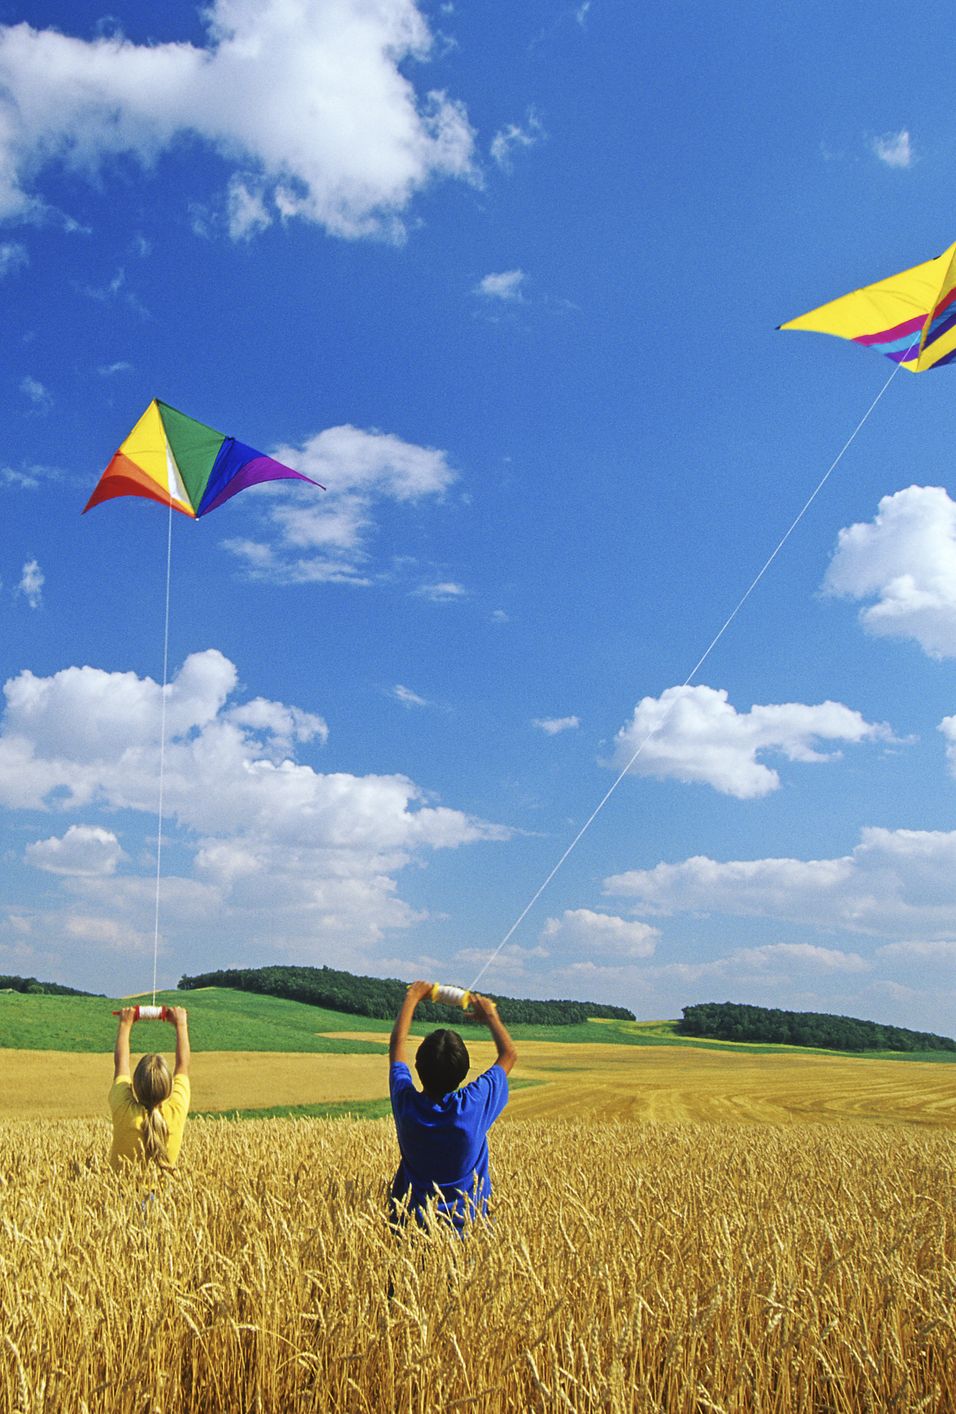 Good Friday Facts Children Flying Kites Blue Sky Wheat Field